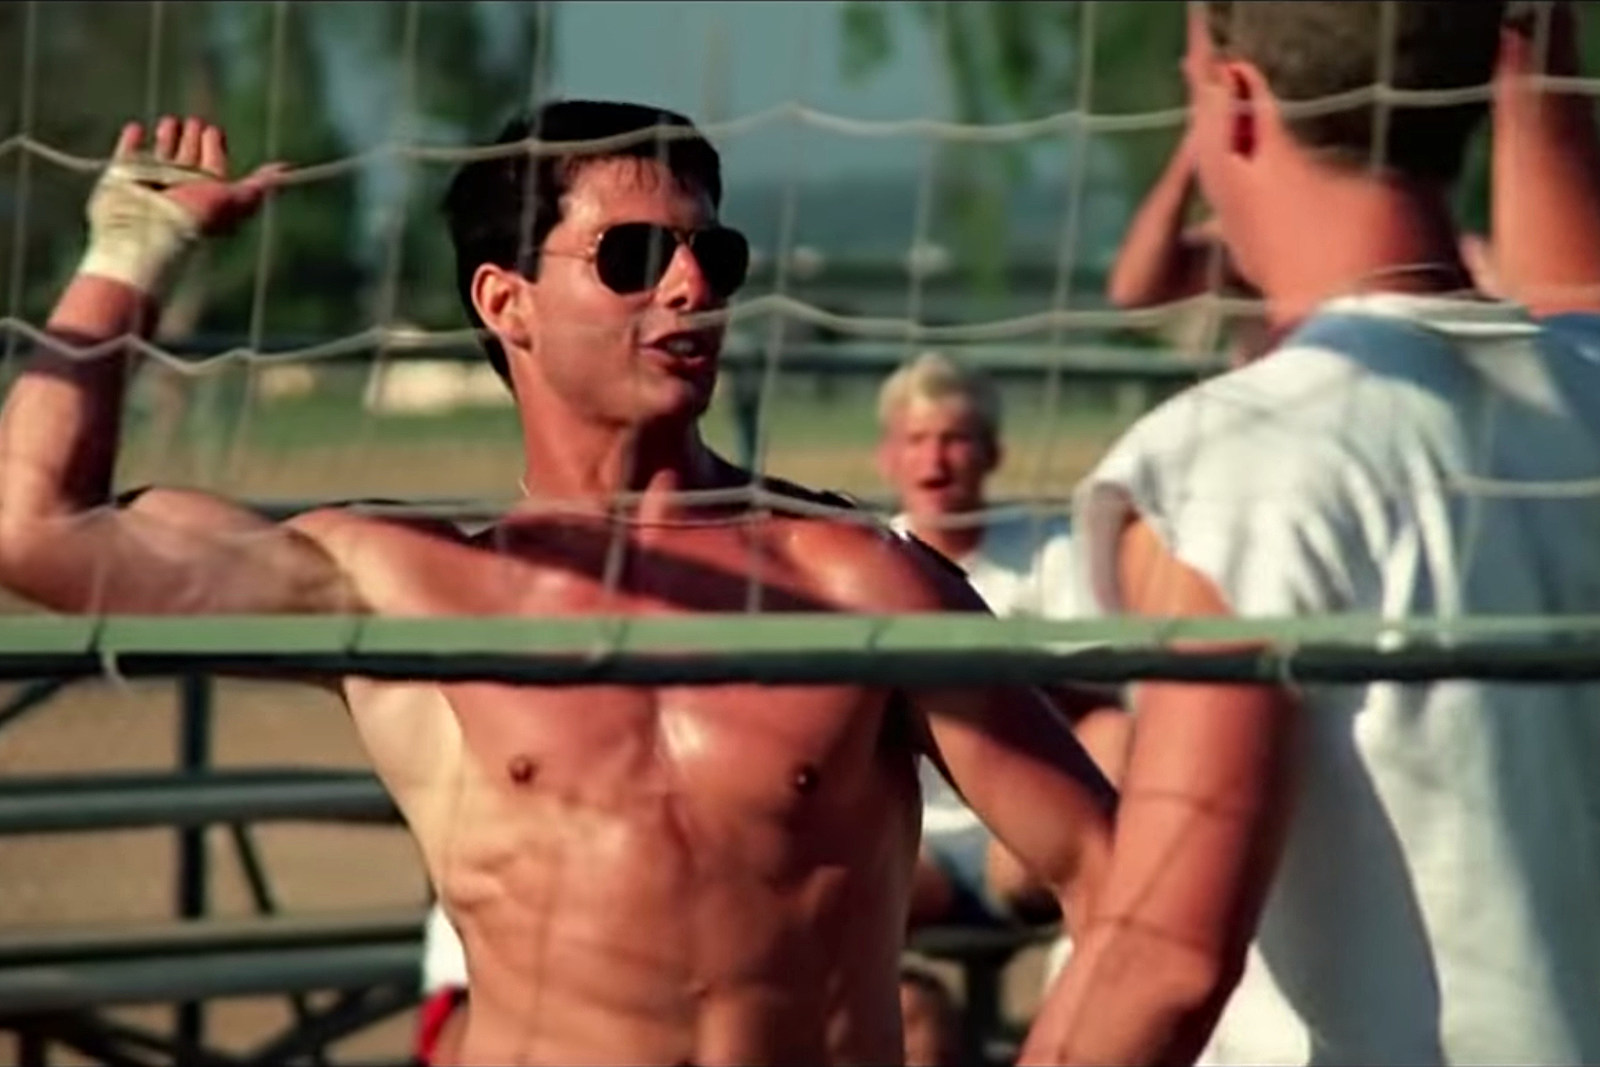 Top Guns 2011 Full Movie - Why 'Top Gun' Features That 'Soft Porn' Volleyball Scene